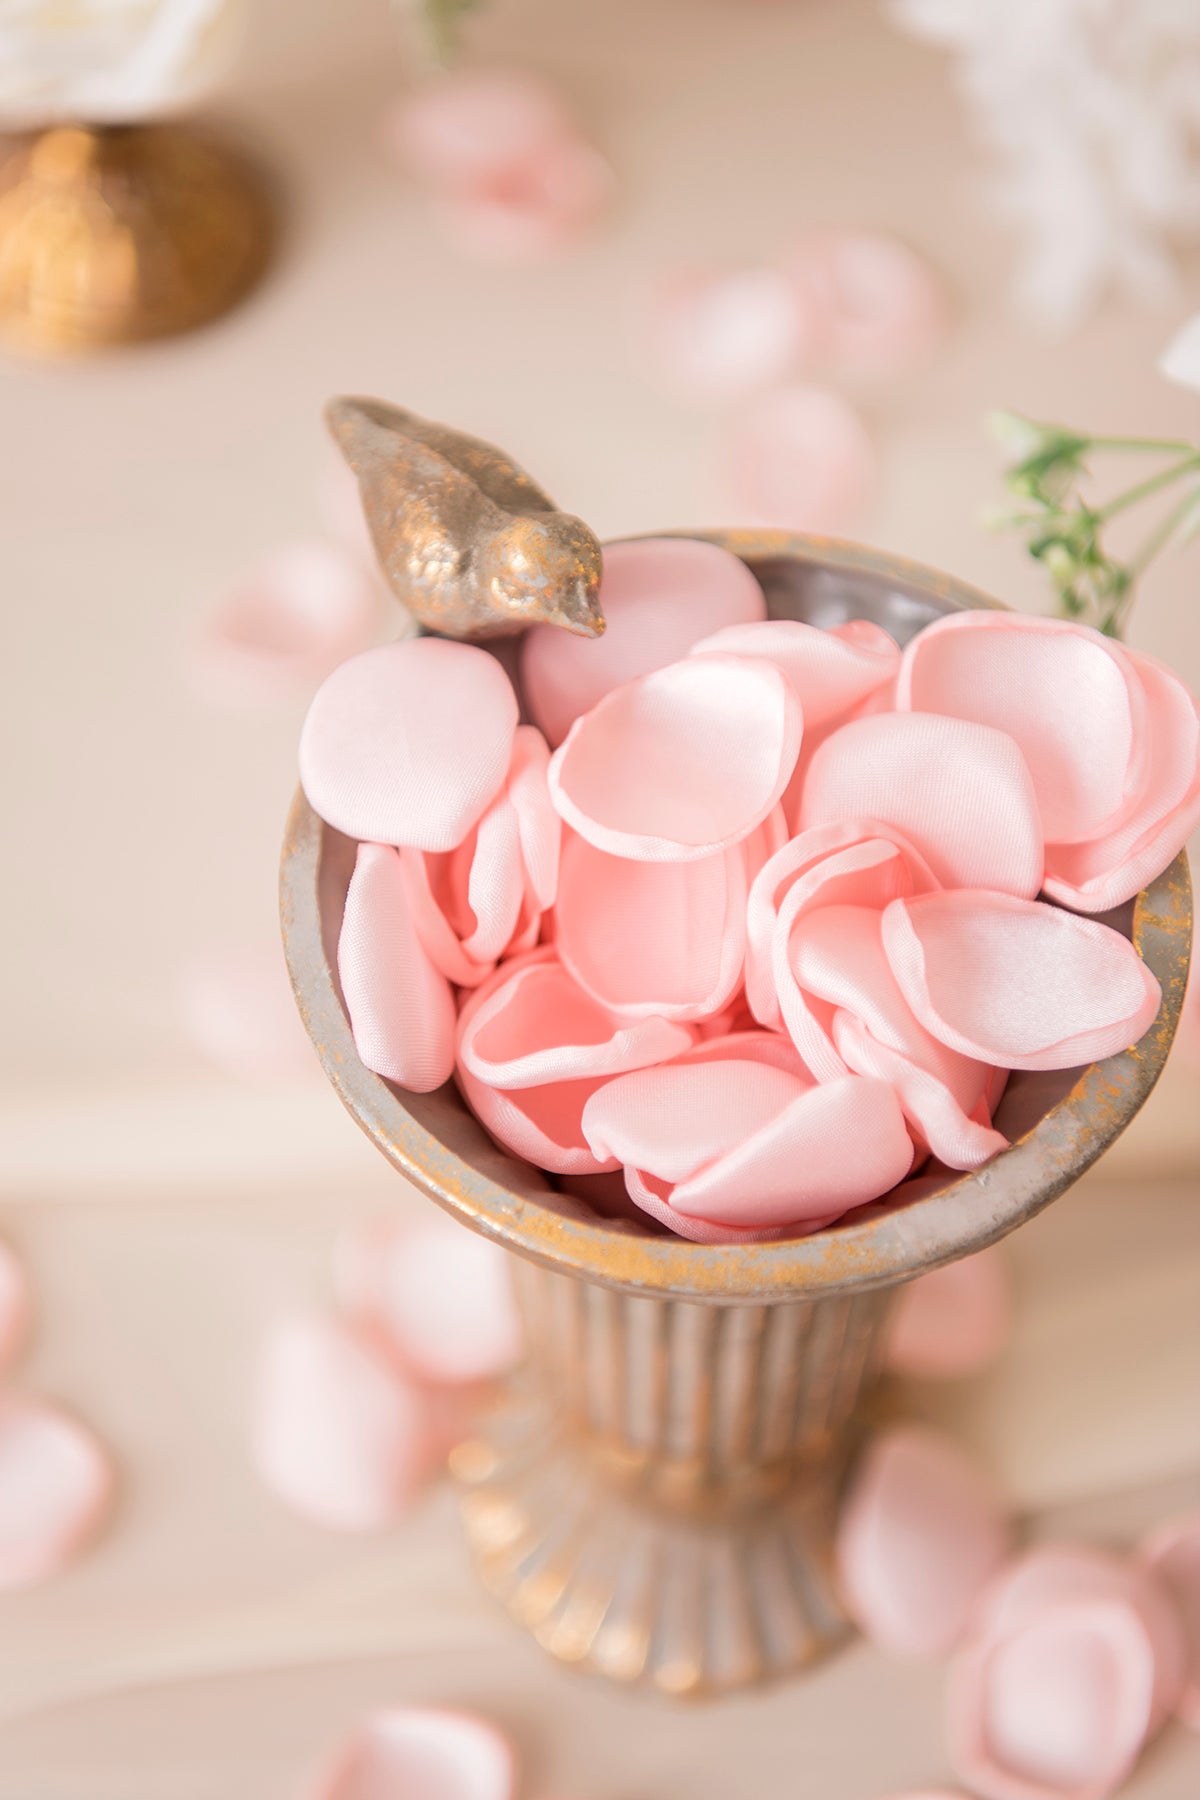  ATFL 0.9 Pound Pink Rose Petals, 5000 Pcs Rose Petals for  Romantic Night for Her Set,Fake Pink Flower Petals for Wedding  Decorations,Fake Silk Rose Petals for Will You Marry Me 